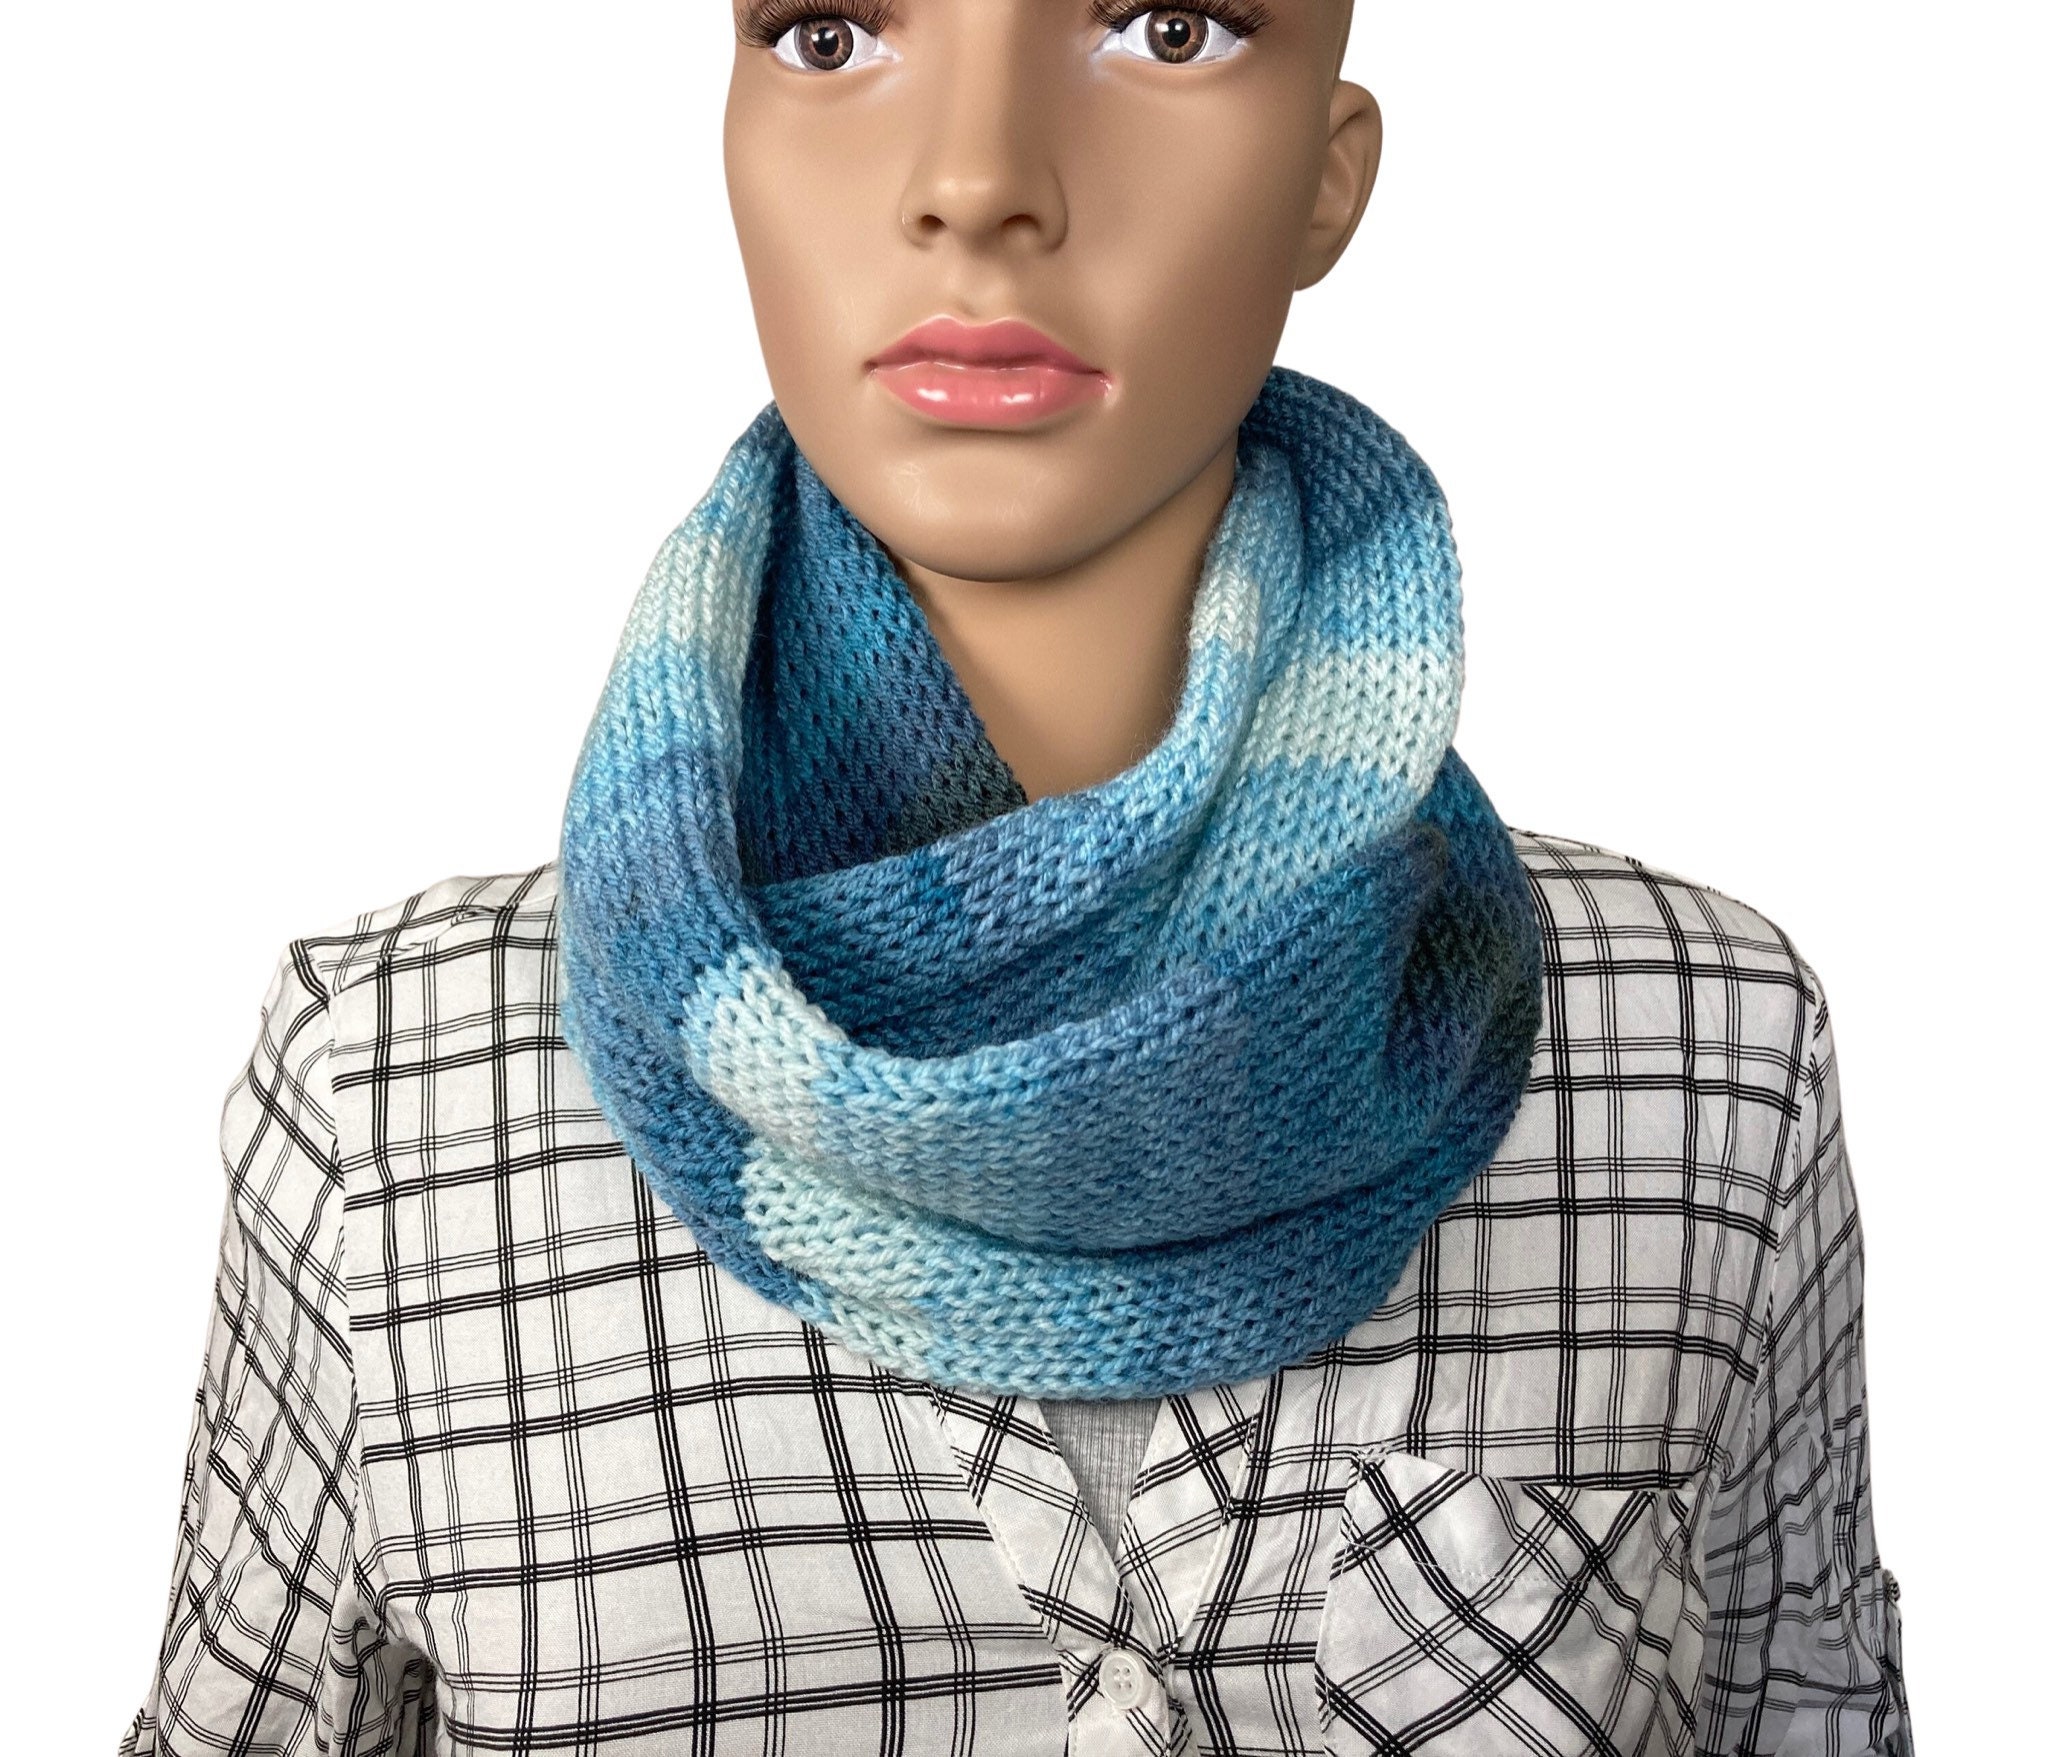 Knitted Snood Neck Warmer Women's Infinity Scarf Circle Scarf Loop Scarf  Wool Scarf Knit Accessories Girls Winter Scarf Handmade in UK -  India